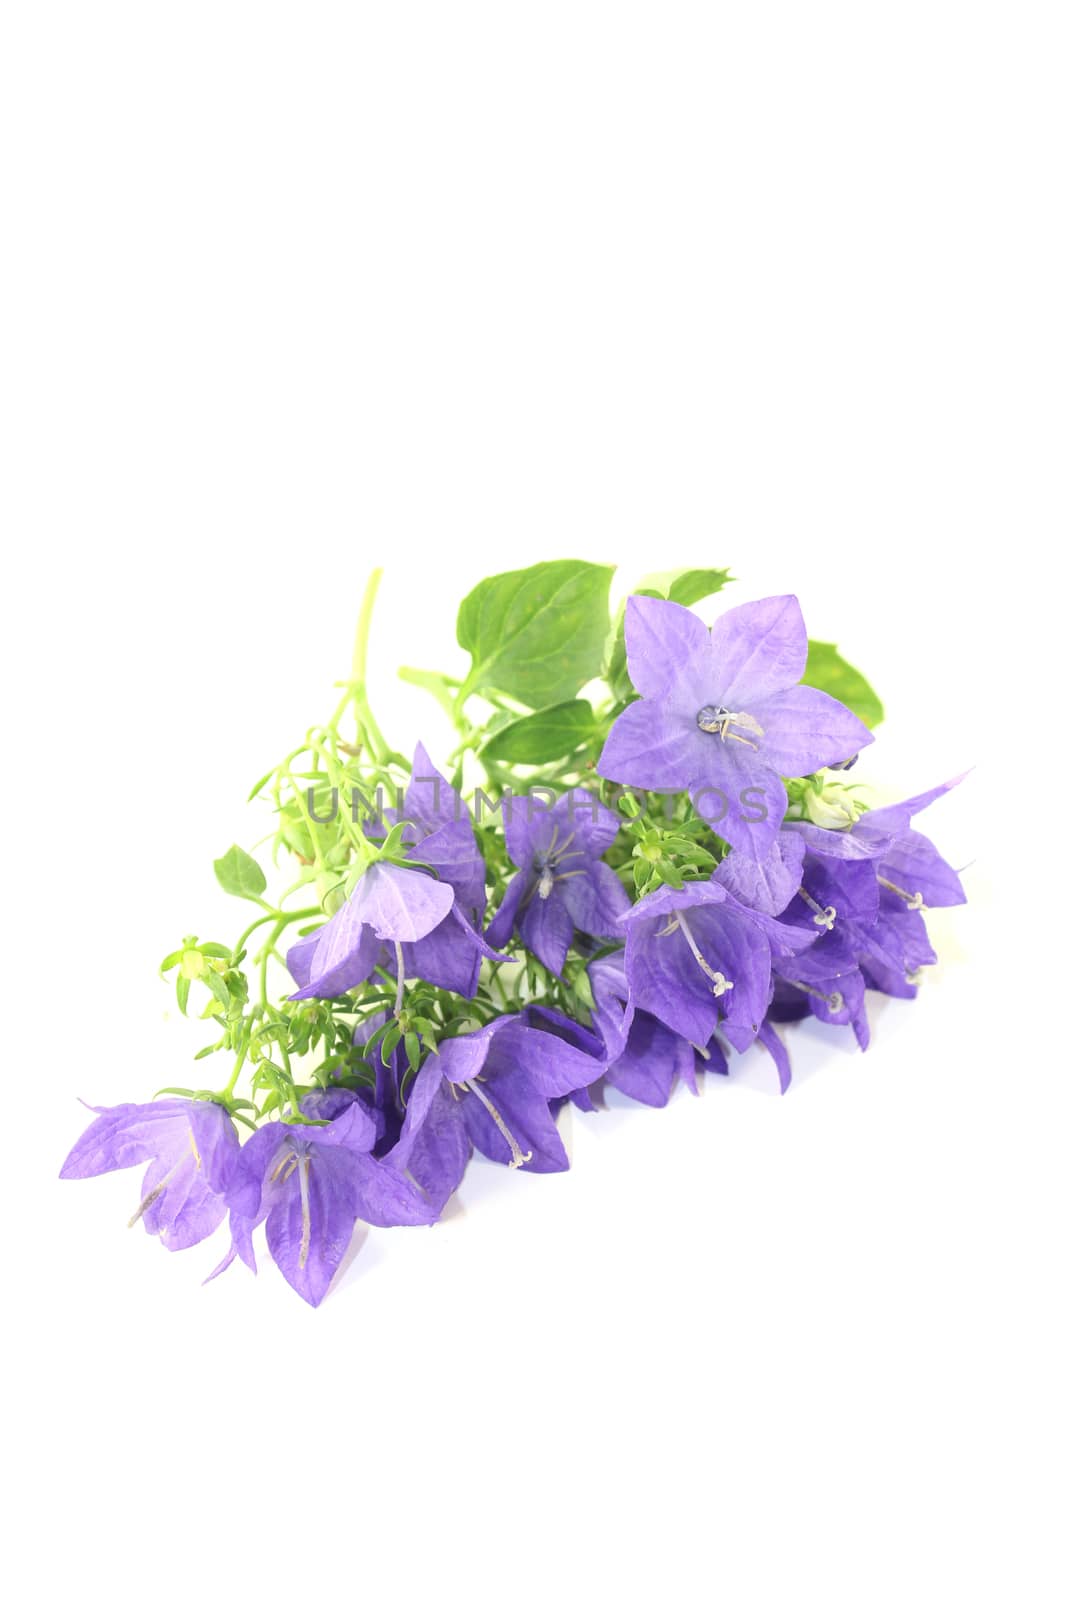 blue bellflowers with leafs and blossoms on a light background